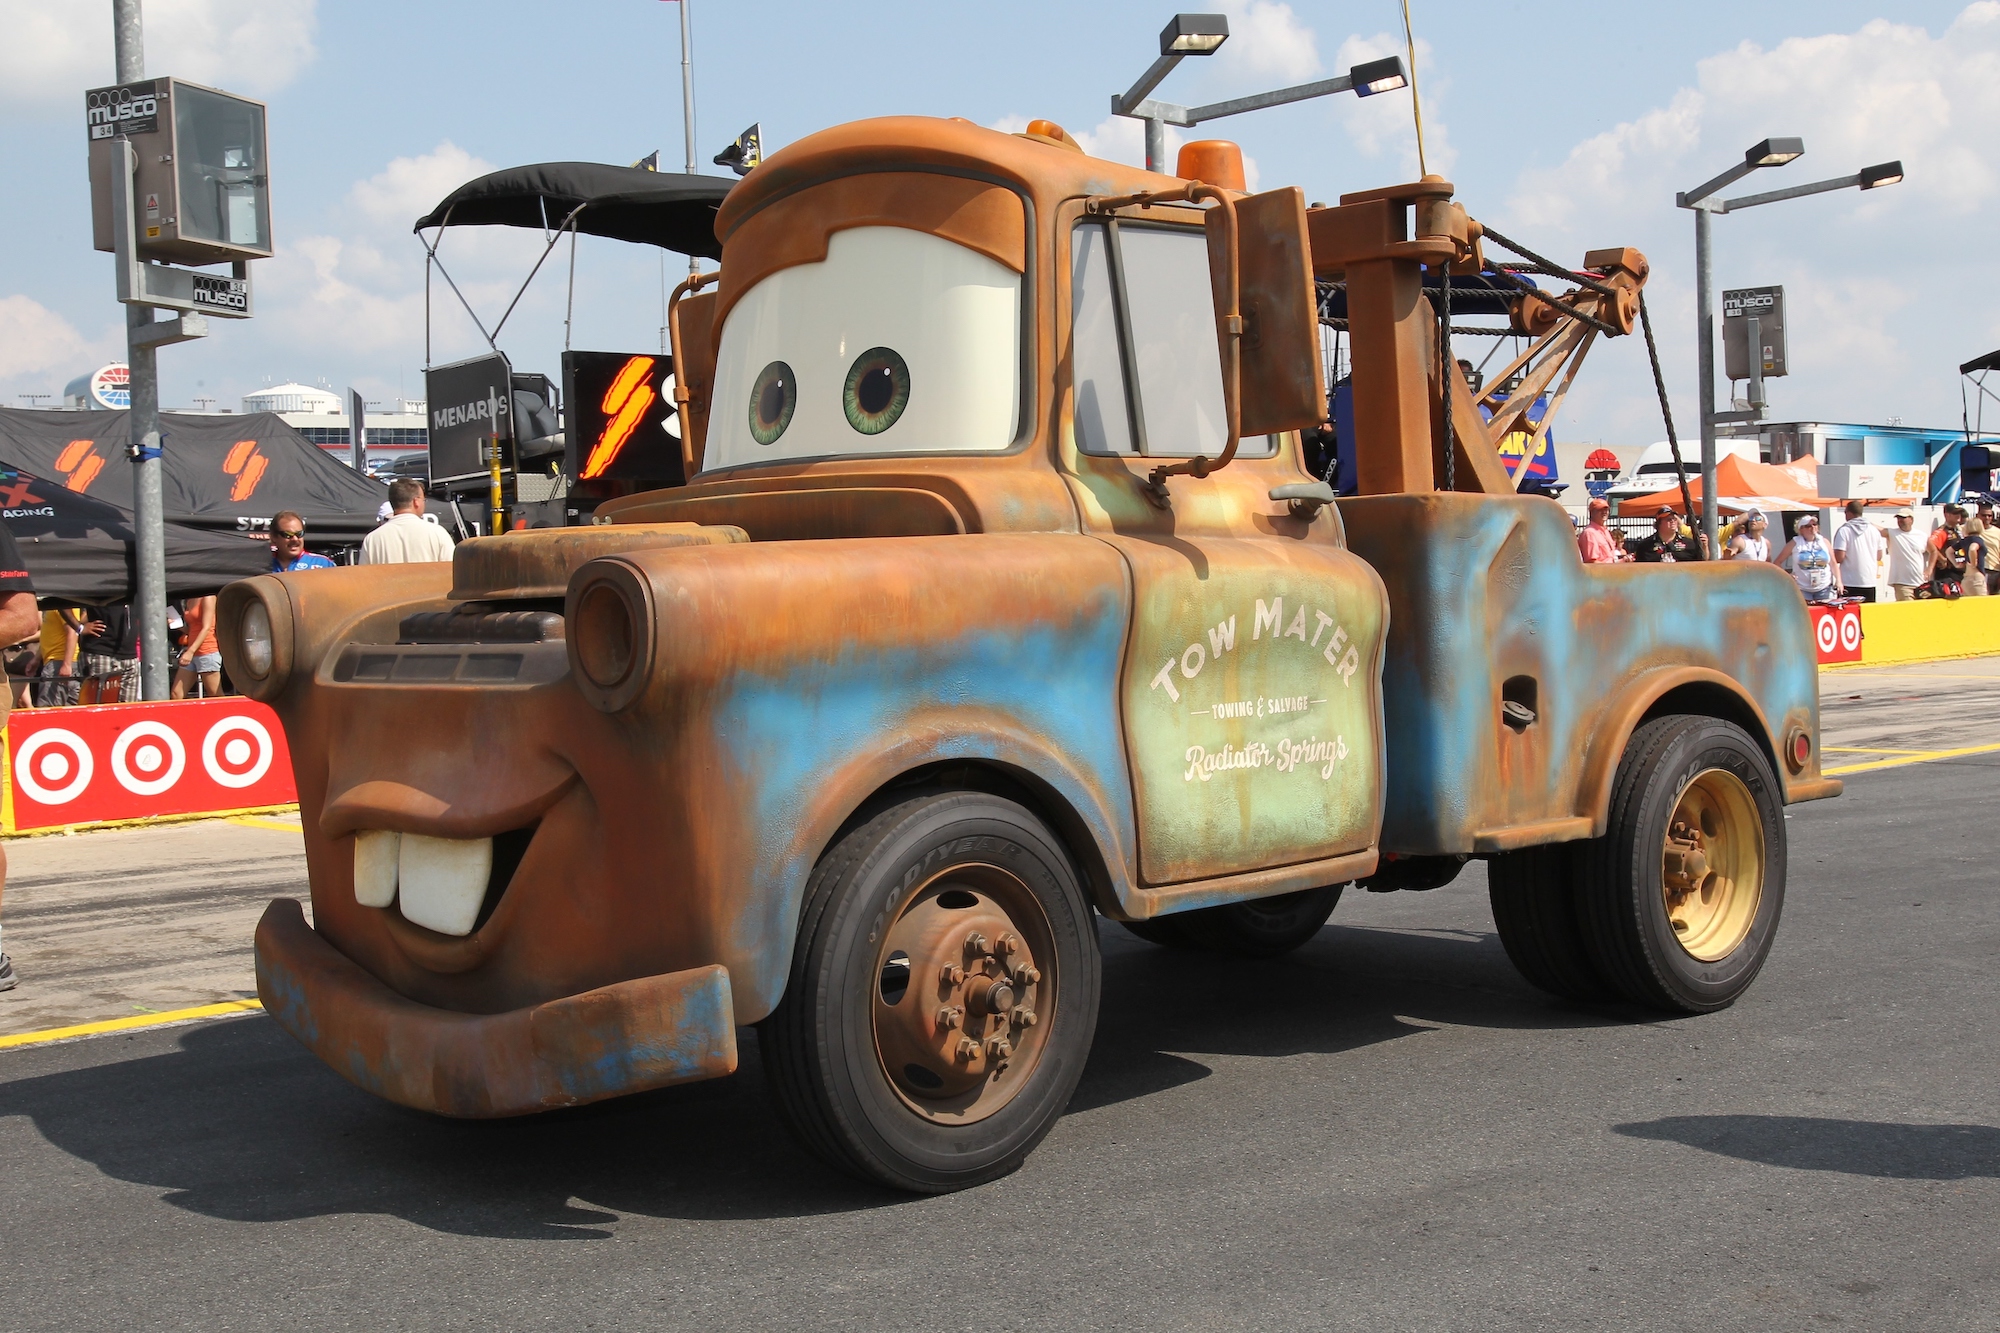 Tow Mater from the 'Cars' movies.